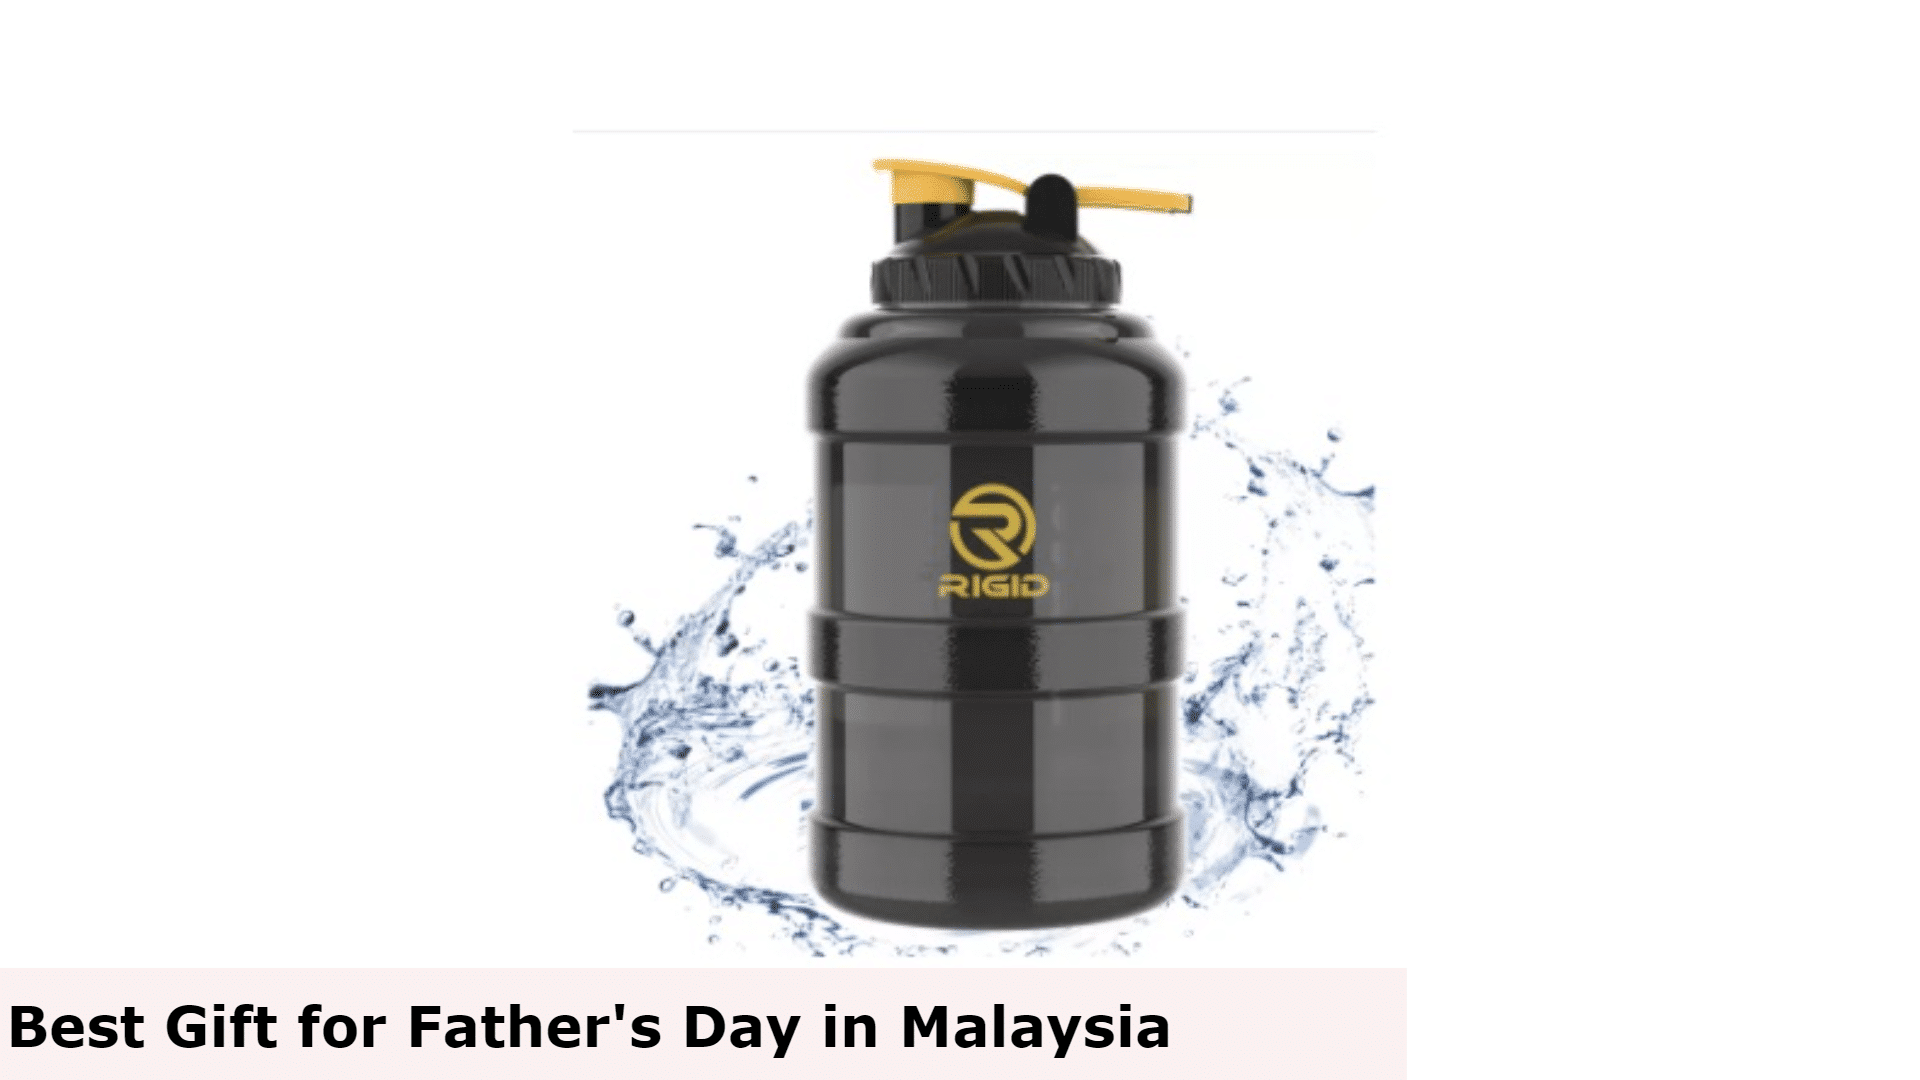 Water Bottle - Best Gift for Father's Day in Malaysia, Best gift for Father's Day Malaysia, Best Father's Day Gifts for Dad, What do dads want for Father's Day in Malaysia?, What is a good cheap gift for Father's Day in Malaysia?, Do you give gifts on Father's Day in Malaysia?, gifts for dad who wants nothing, simple father's day gift ideas, father's day gift ideas 2022, father's day gift ideas during covid, father's day gift ideas from daughter, unique gifts for dad, father's day gift ideas from wife, fathers day gifts from son, What buy for a dad that doesn't want anything?, What to get a dad that is hard to buy for?, What should I get my boring dad for Christmas?, What gifts do dads like?,